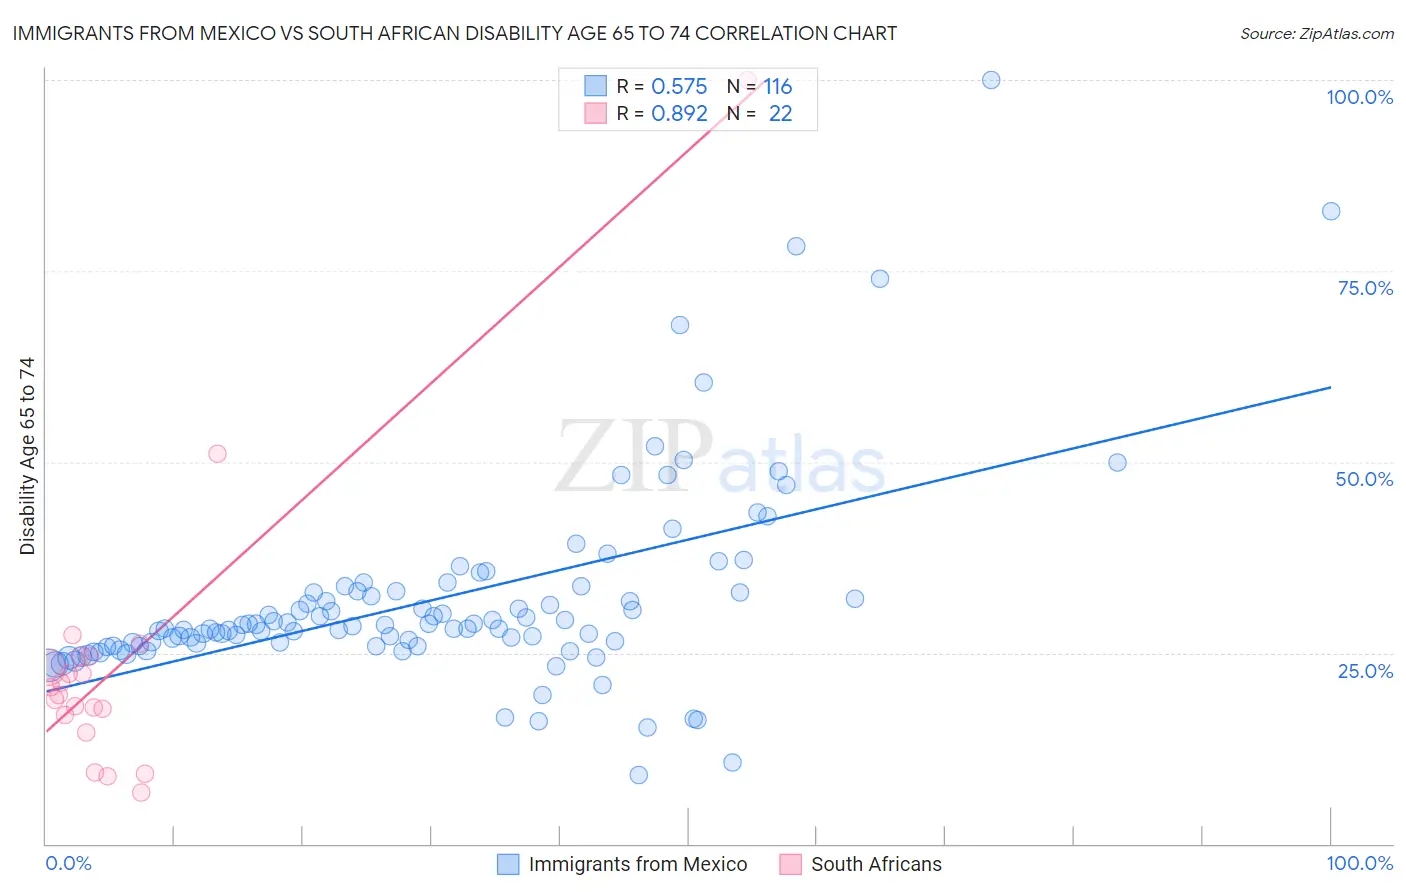 Immigrants from Mexico vs South African Disability Age 65 to 74